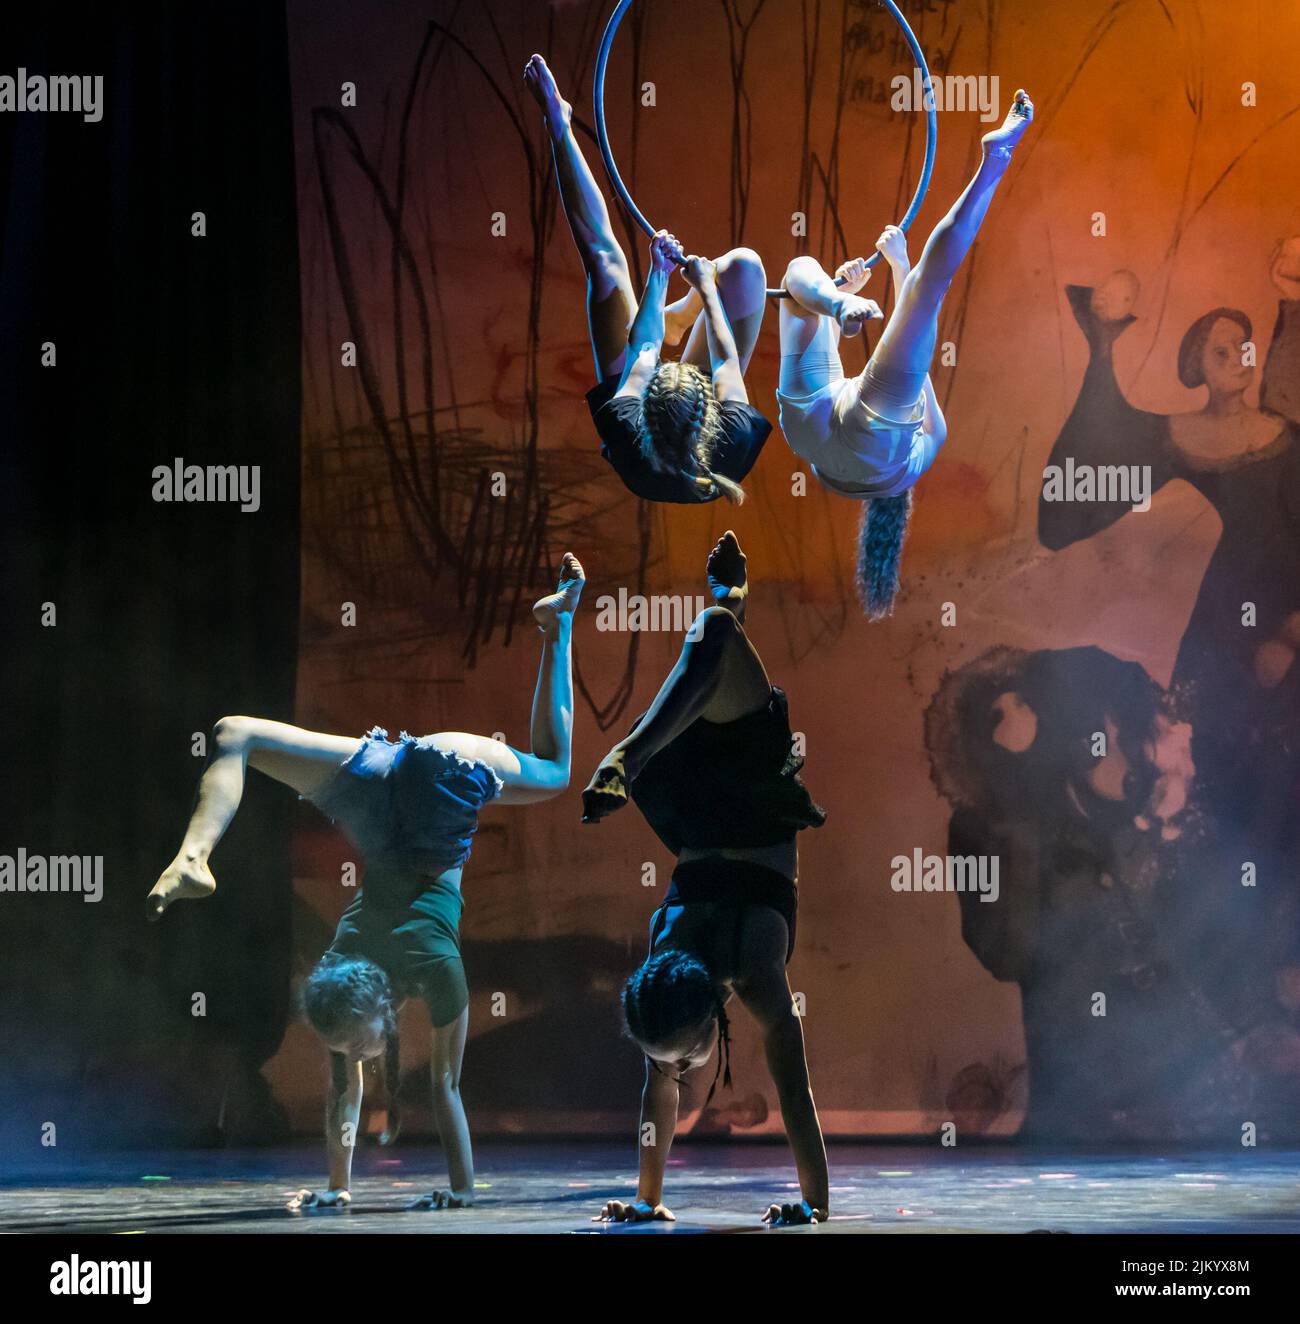 Edinburgh, Scotland, United Kingdom, 3rd August 2022. Edinburgh Festival Fringe: Underbelly Fringe press launch at McEwan Hall. Underbelly showcases the shows on at this year’s Fringe. Pictured: Boom! acrobatics. Credit: Sally Anderson/Alamy Live News Stock Photo